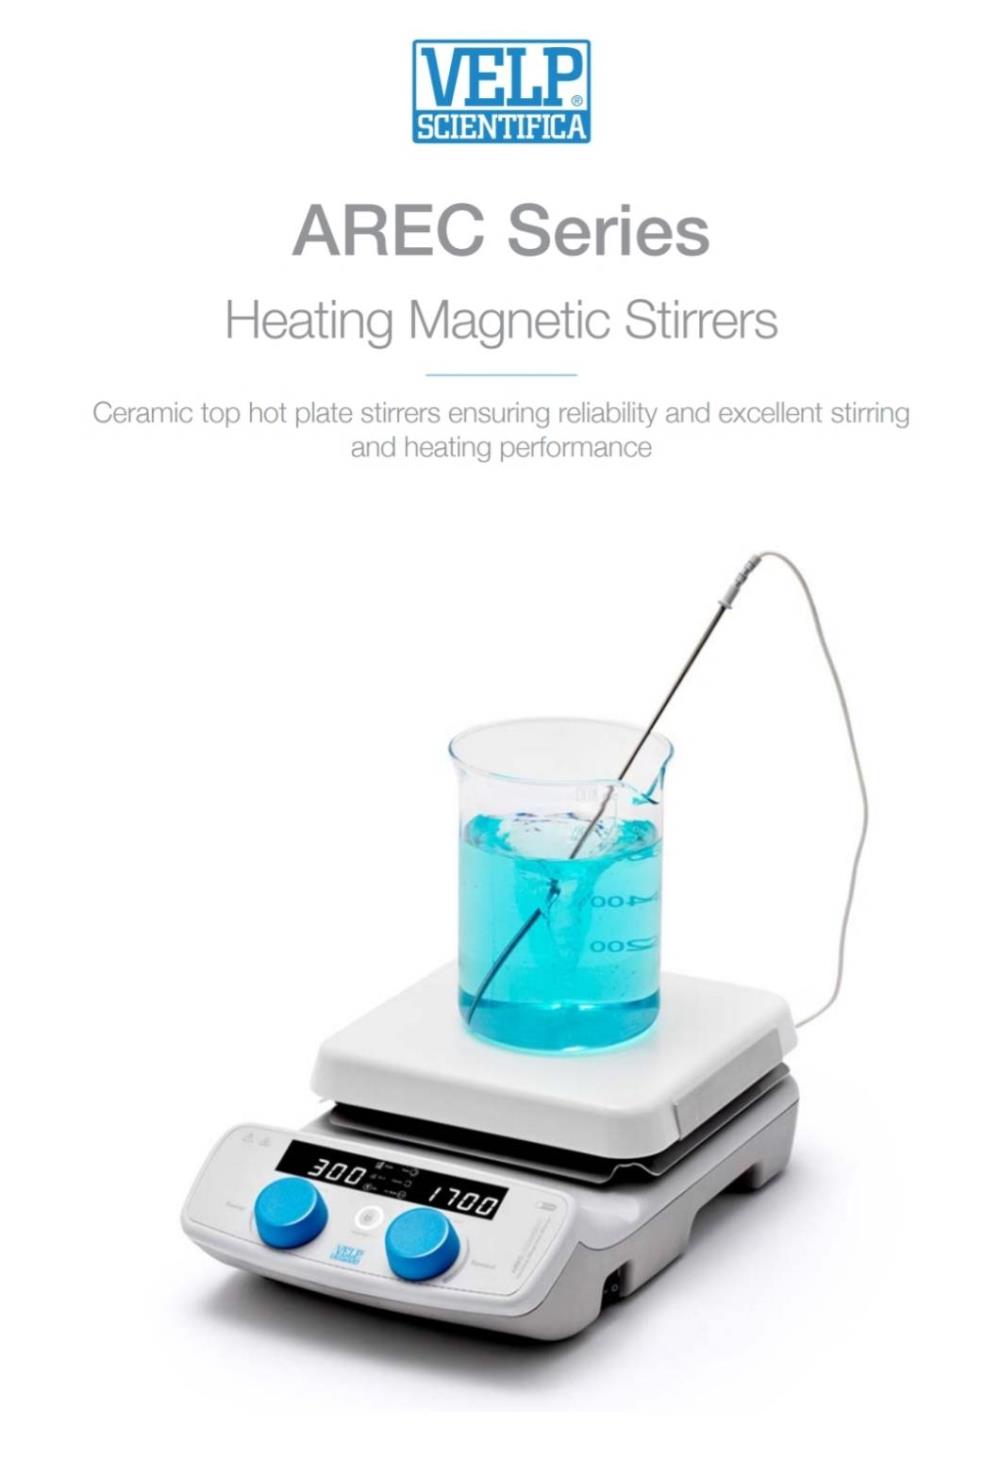 Velp AREC Series Heating Magnetic Stirrers,hotplate,hotplate stirrer,stirrer,magnetic stirrer,เครื่องกวนสาร,Velp,Energy and Environment/Environment Instrument